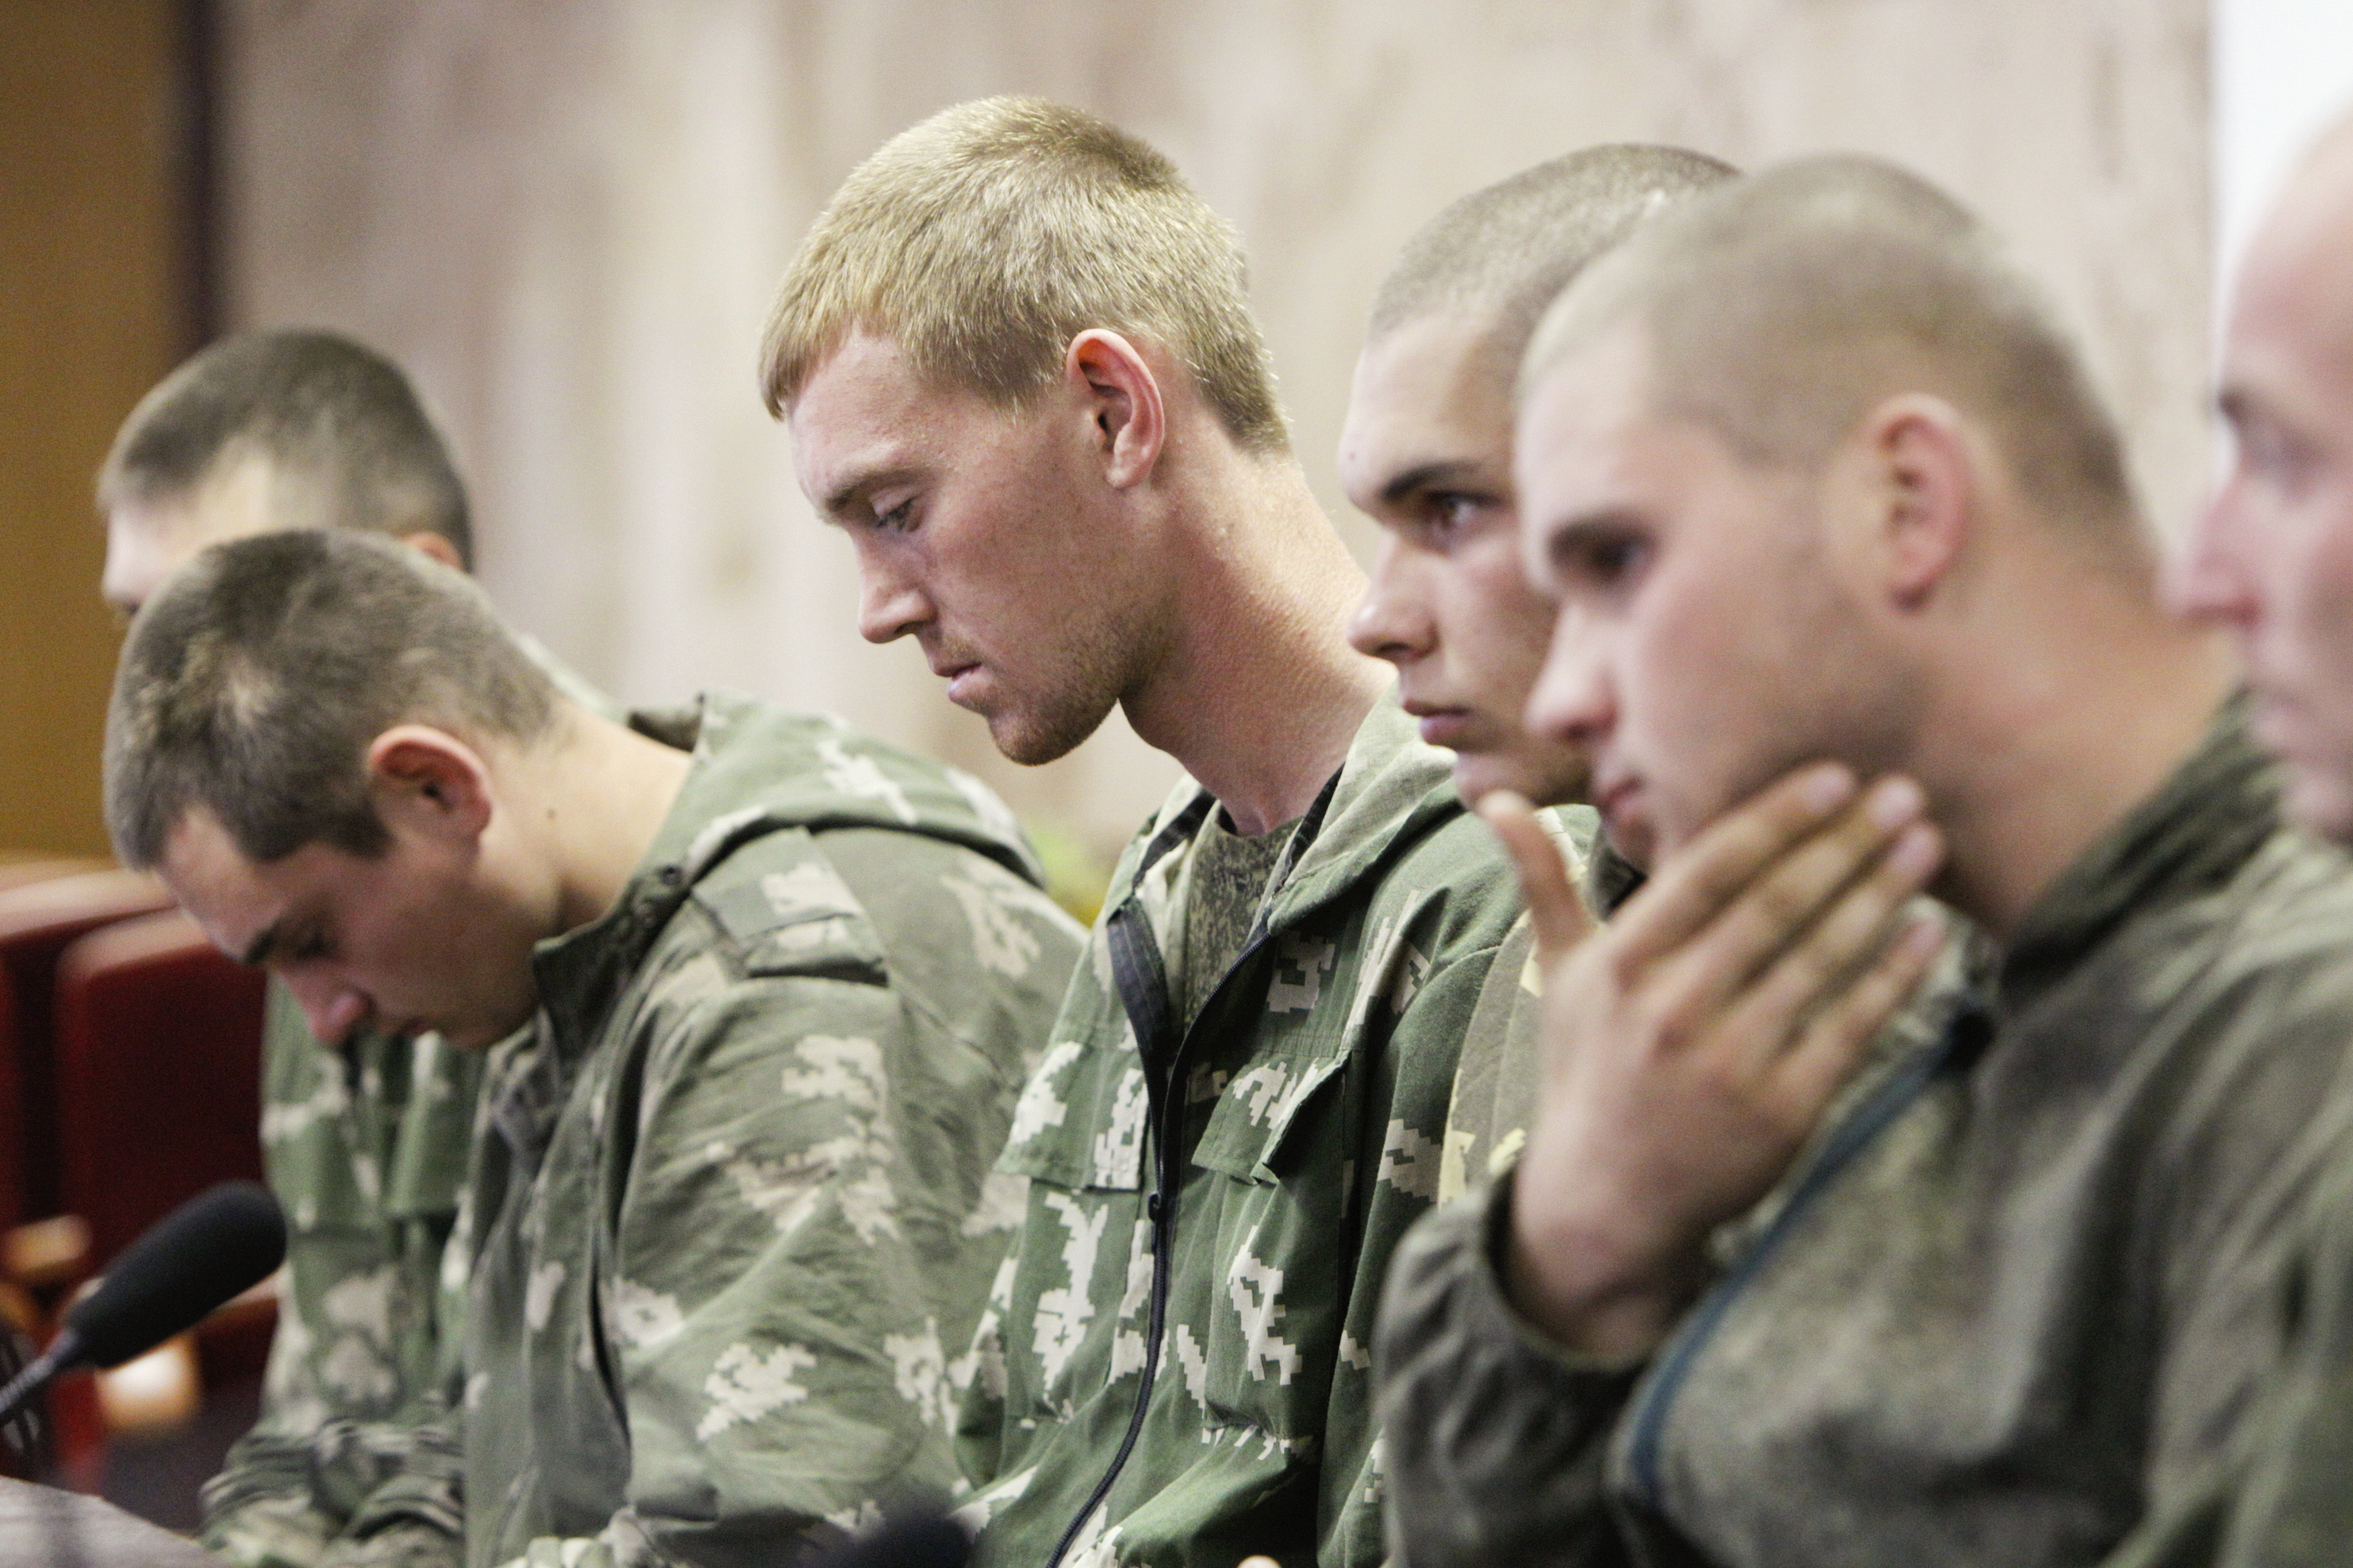 A group of Russian servicemen, taken prisoner by Ukrainian authorities, are presented at a news conference in Kiev on Aug. 27, 2014. Ukraine said on Tuesday its forces had captured a group of Russian paratroopers who had crossed into Ukrainian territory on a "special mission," but Moscow said they had ended up there by mistake (Valentyn Ogirenko—Reuters)